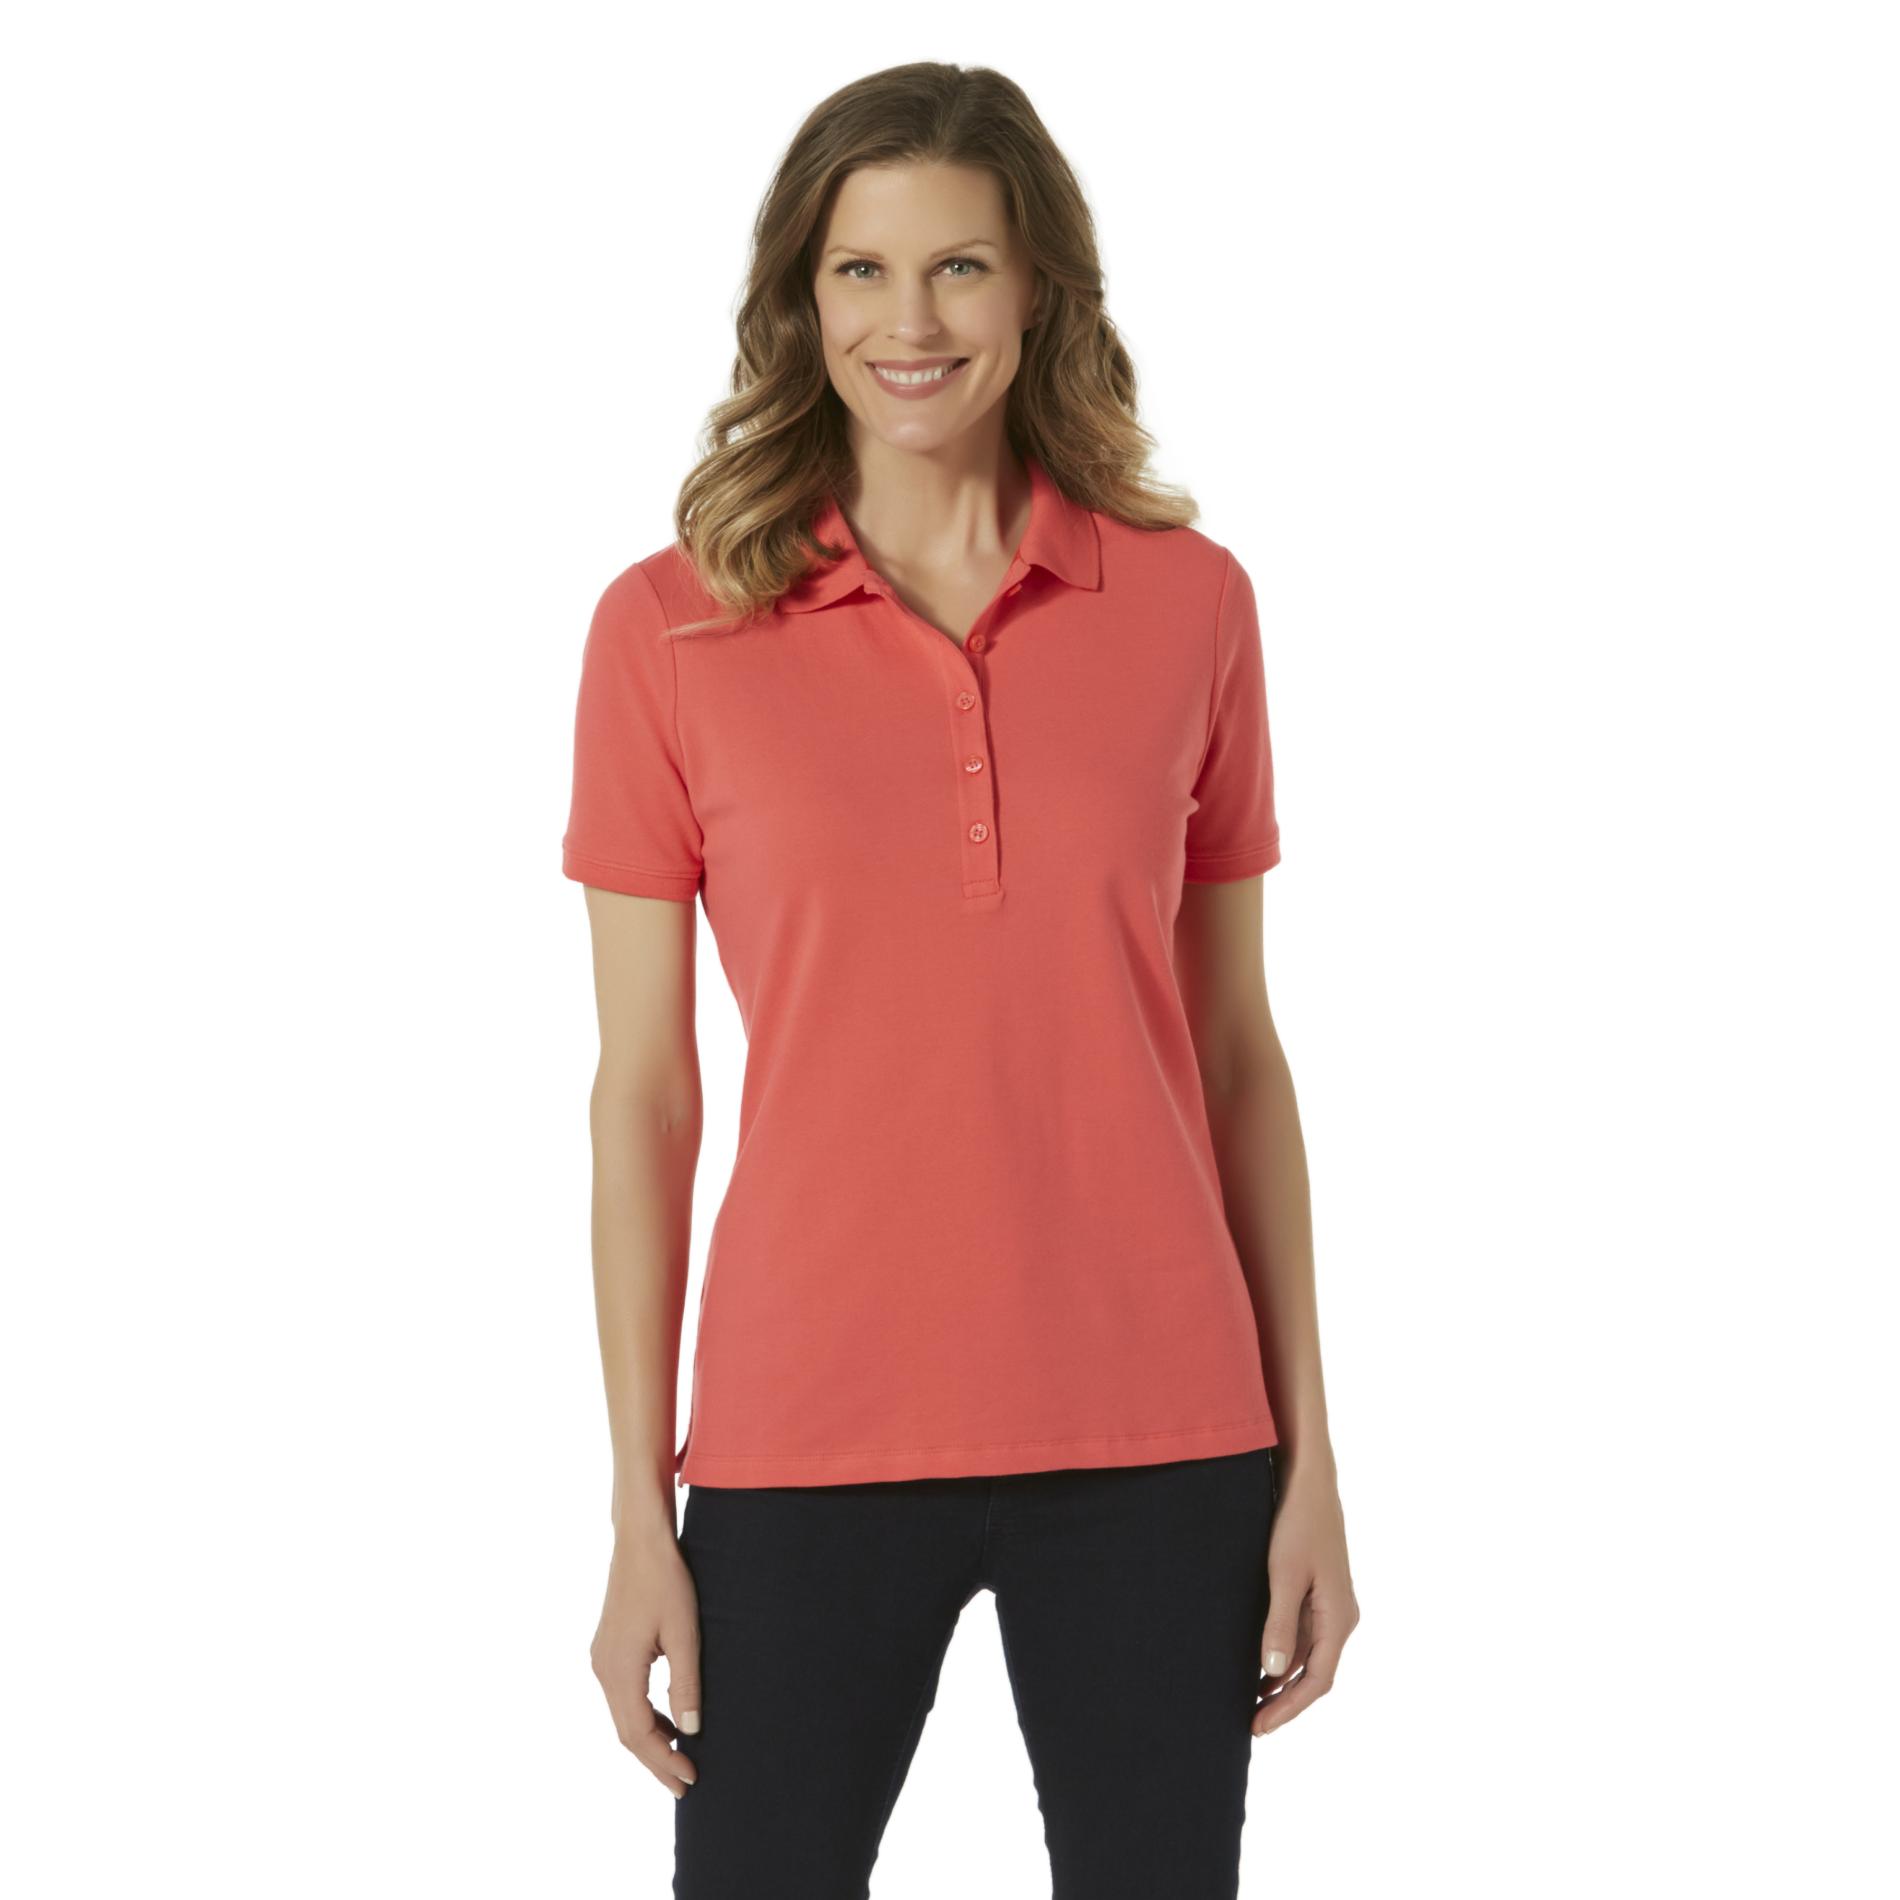 Polo Shirts For Women: Ideal For
Formal  And Casual Wear